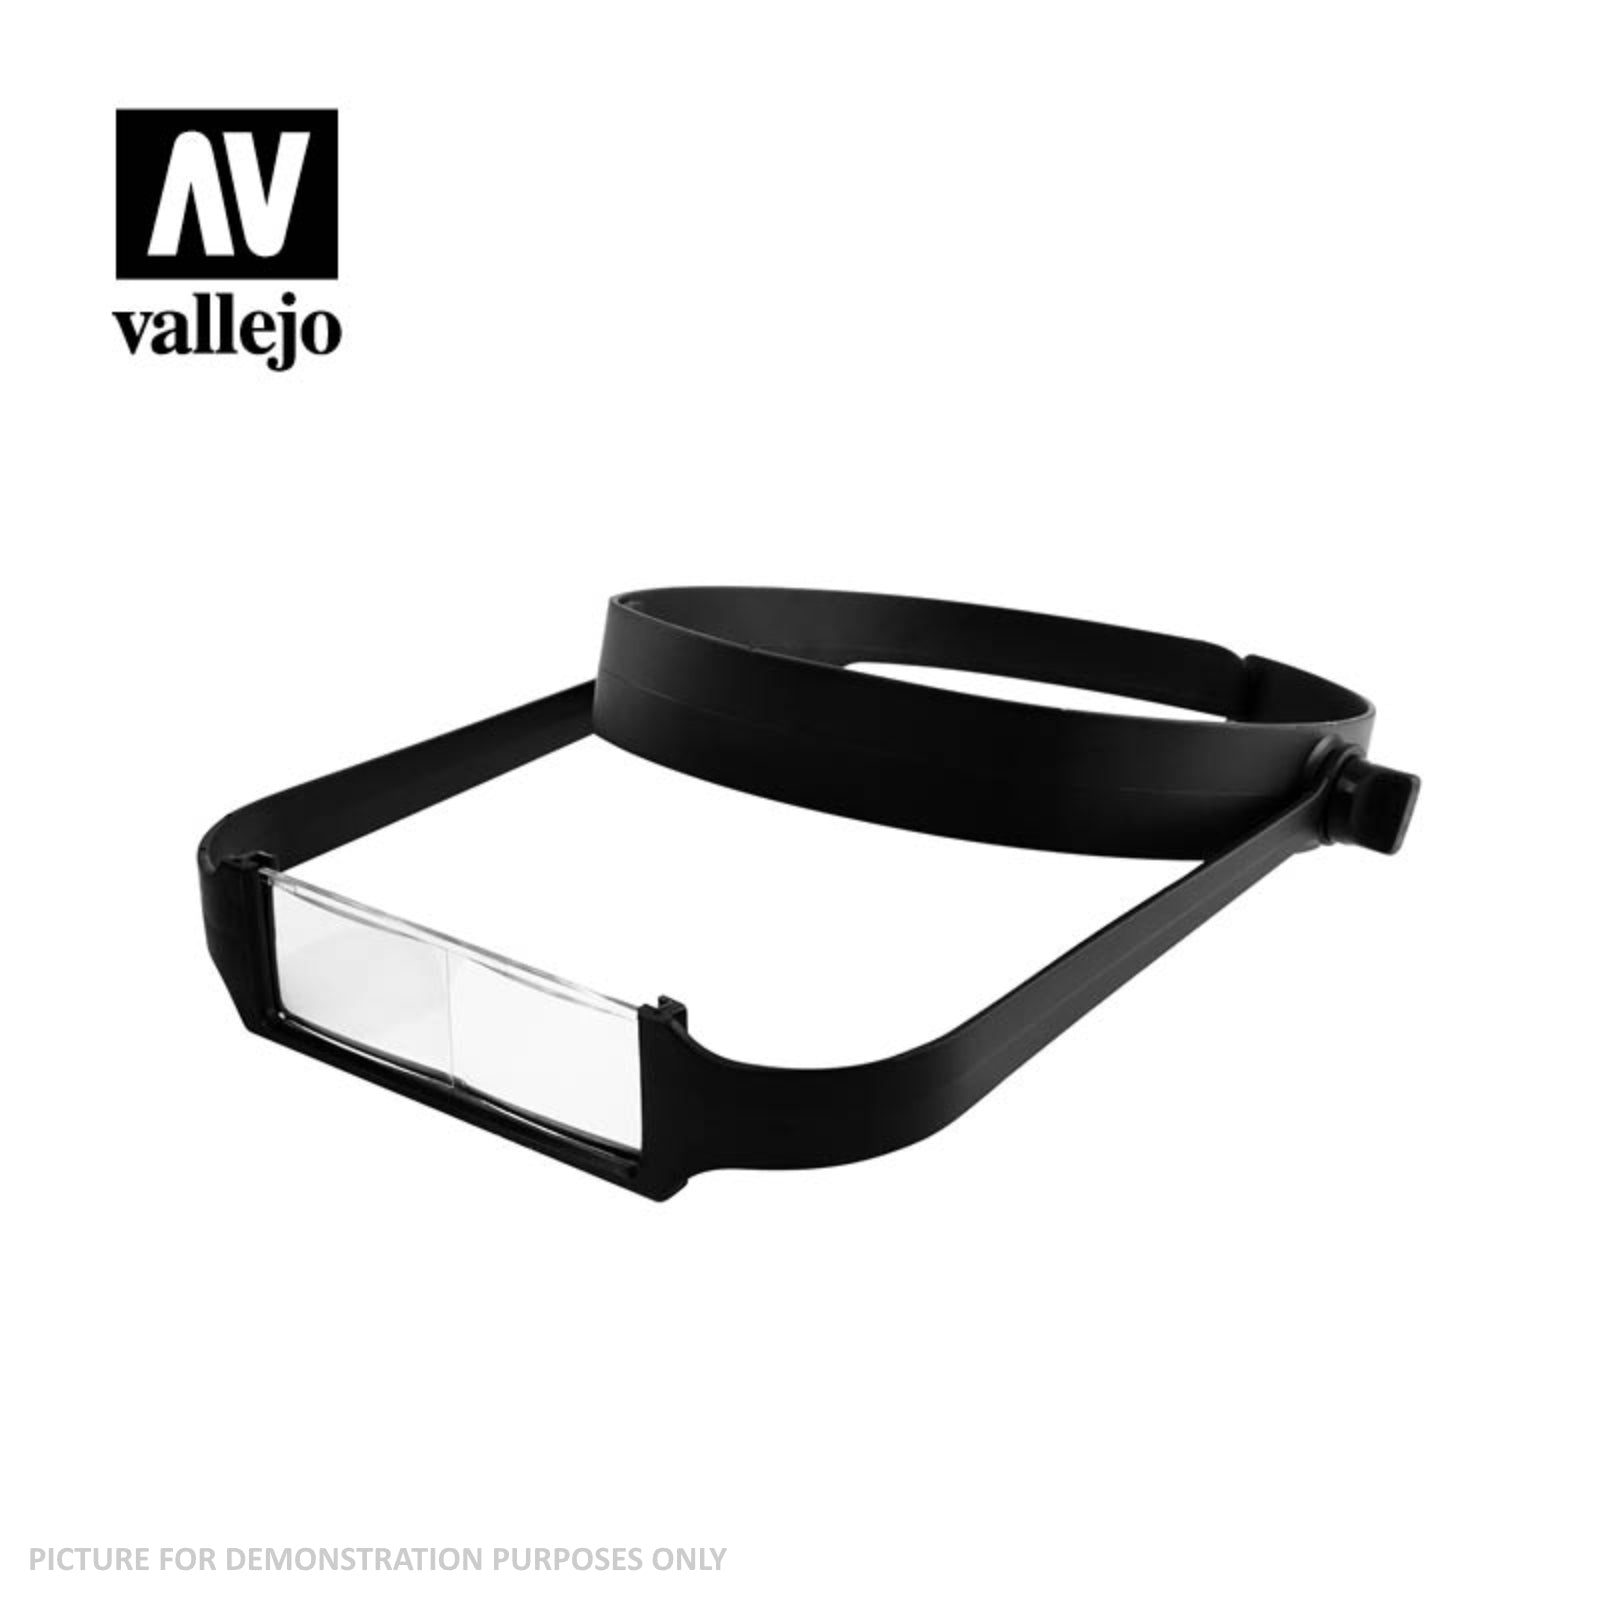 Vallejo Accessories - Lightweight Headband Magnifier with 4 Lenses